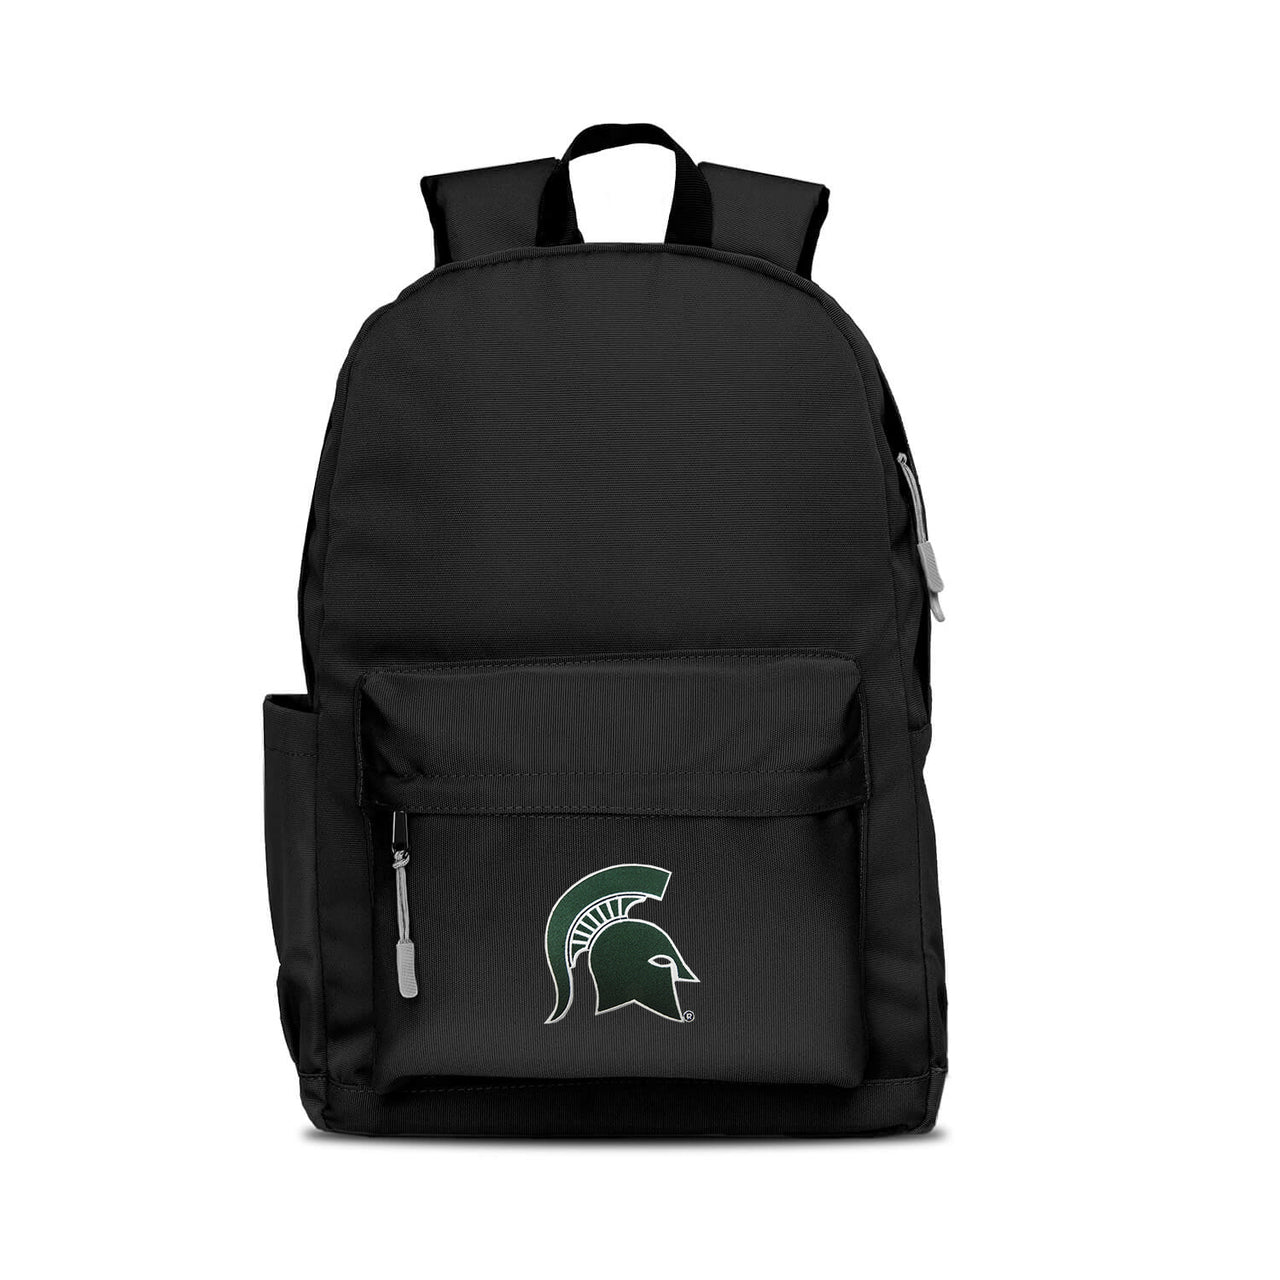 Michigan State Spartans Campus Laptop Backpack- Black